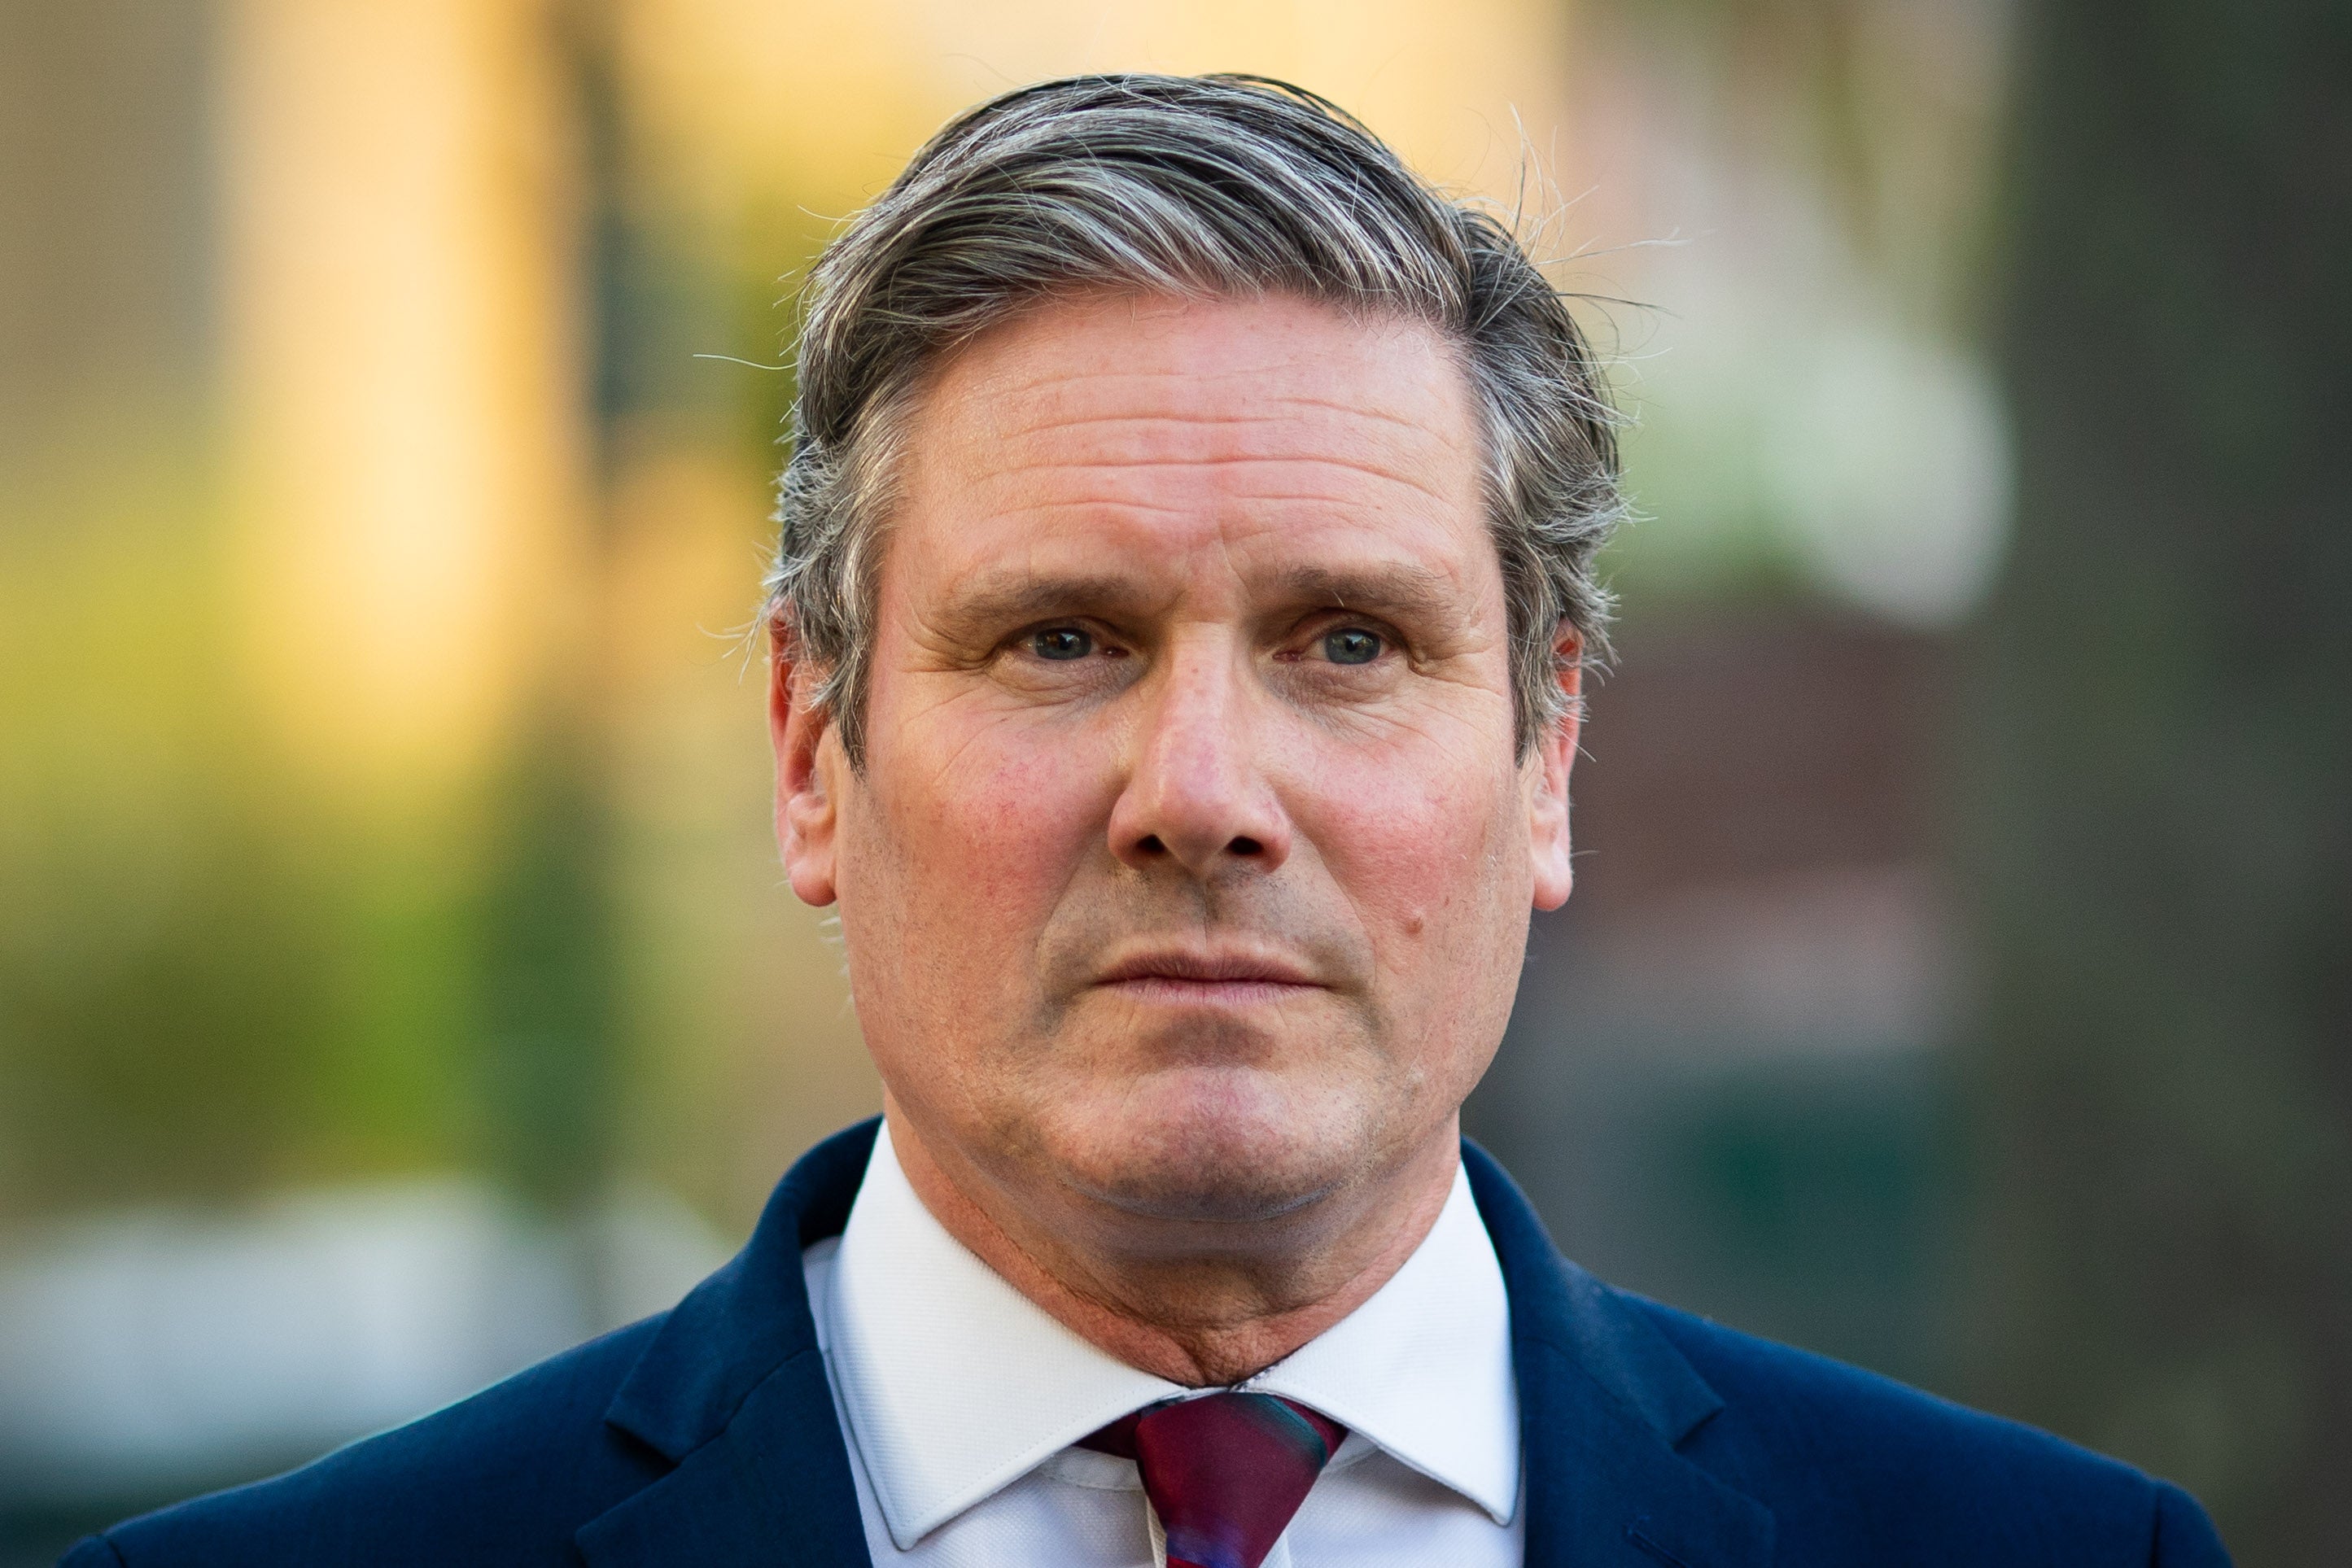 Labour leader Keir Starmer has revealed his complex relationship with his distant father in an interview with Desert Island Discs